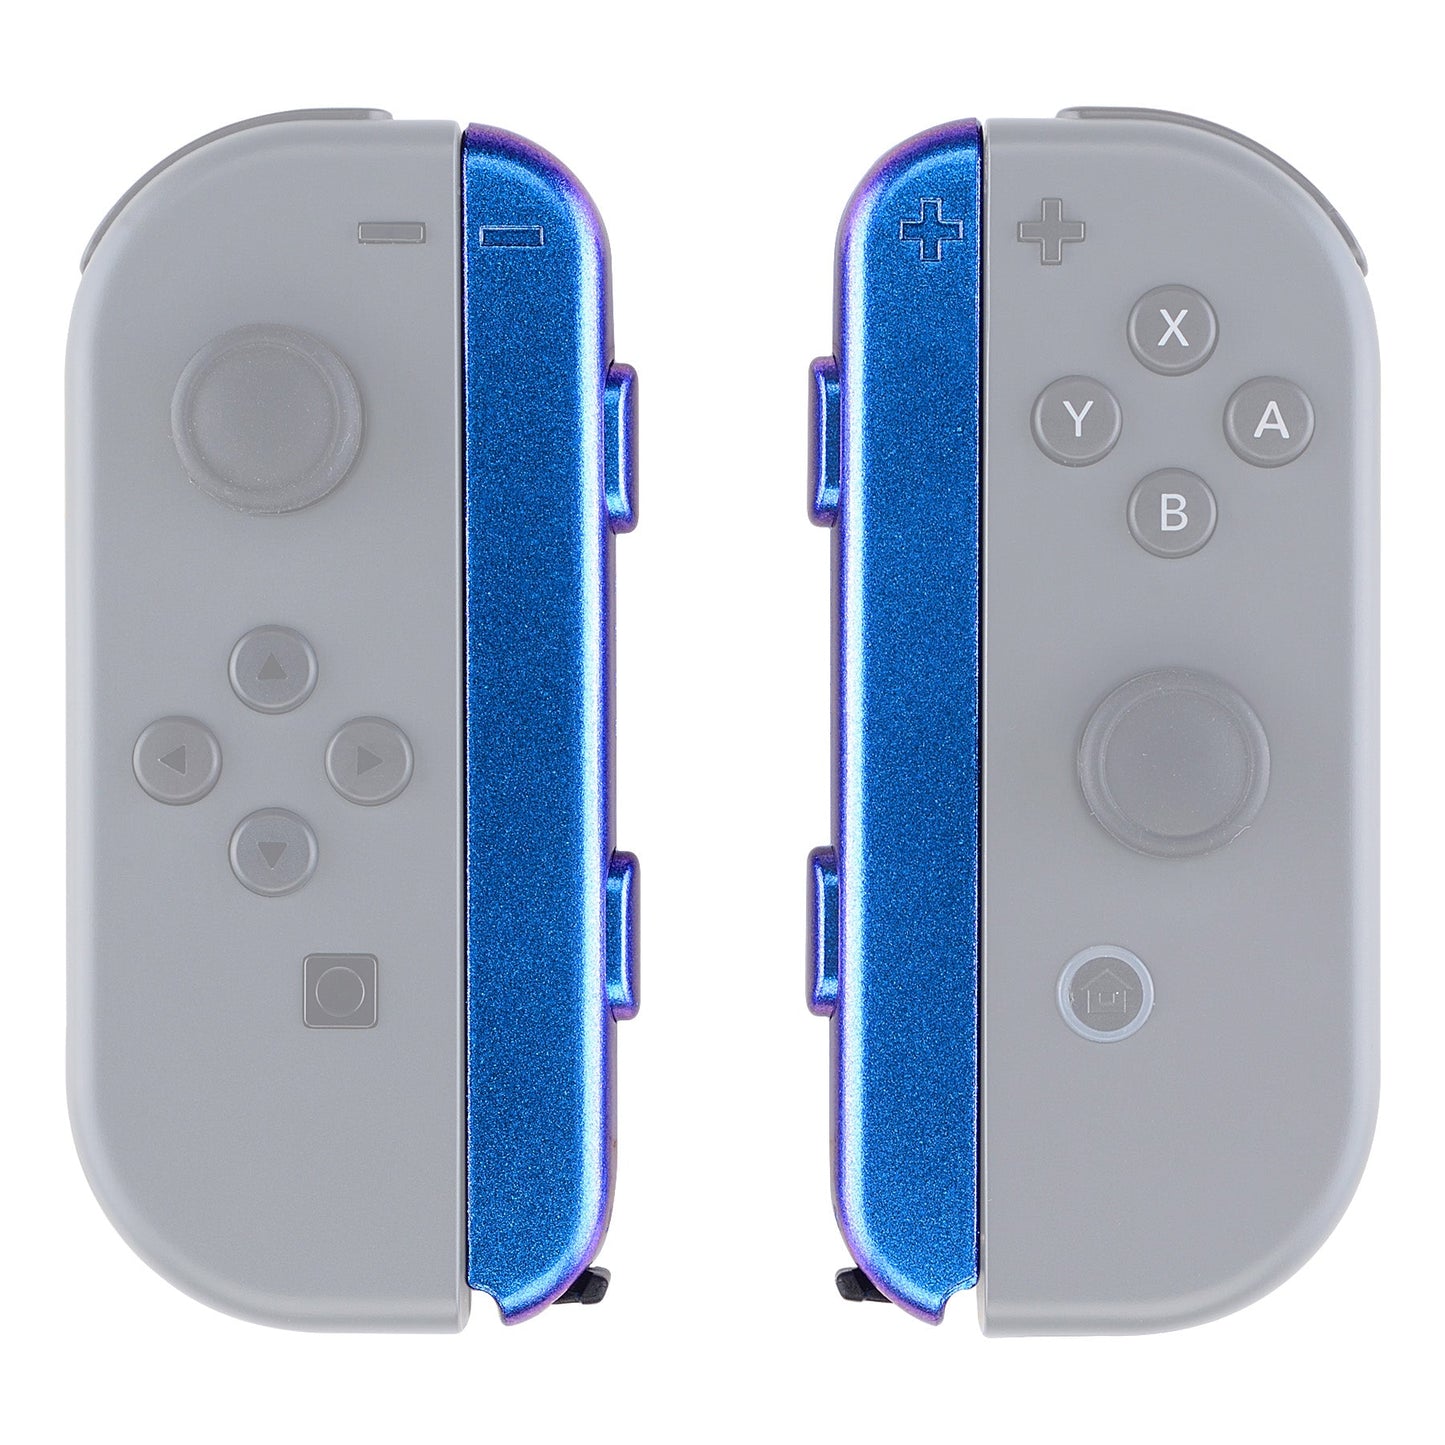 eXtremeRate Retail Chameleon Purple Glossy Replacement shell for Nintendo Switch Joycon Strap, Custom JoyCon Wrist Strap Housing Buttons for Nintendo Switch - 2 Pack - UEP301